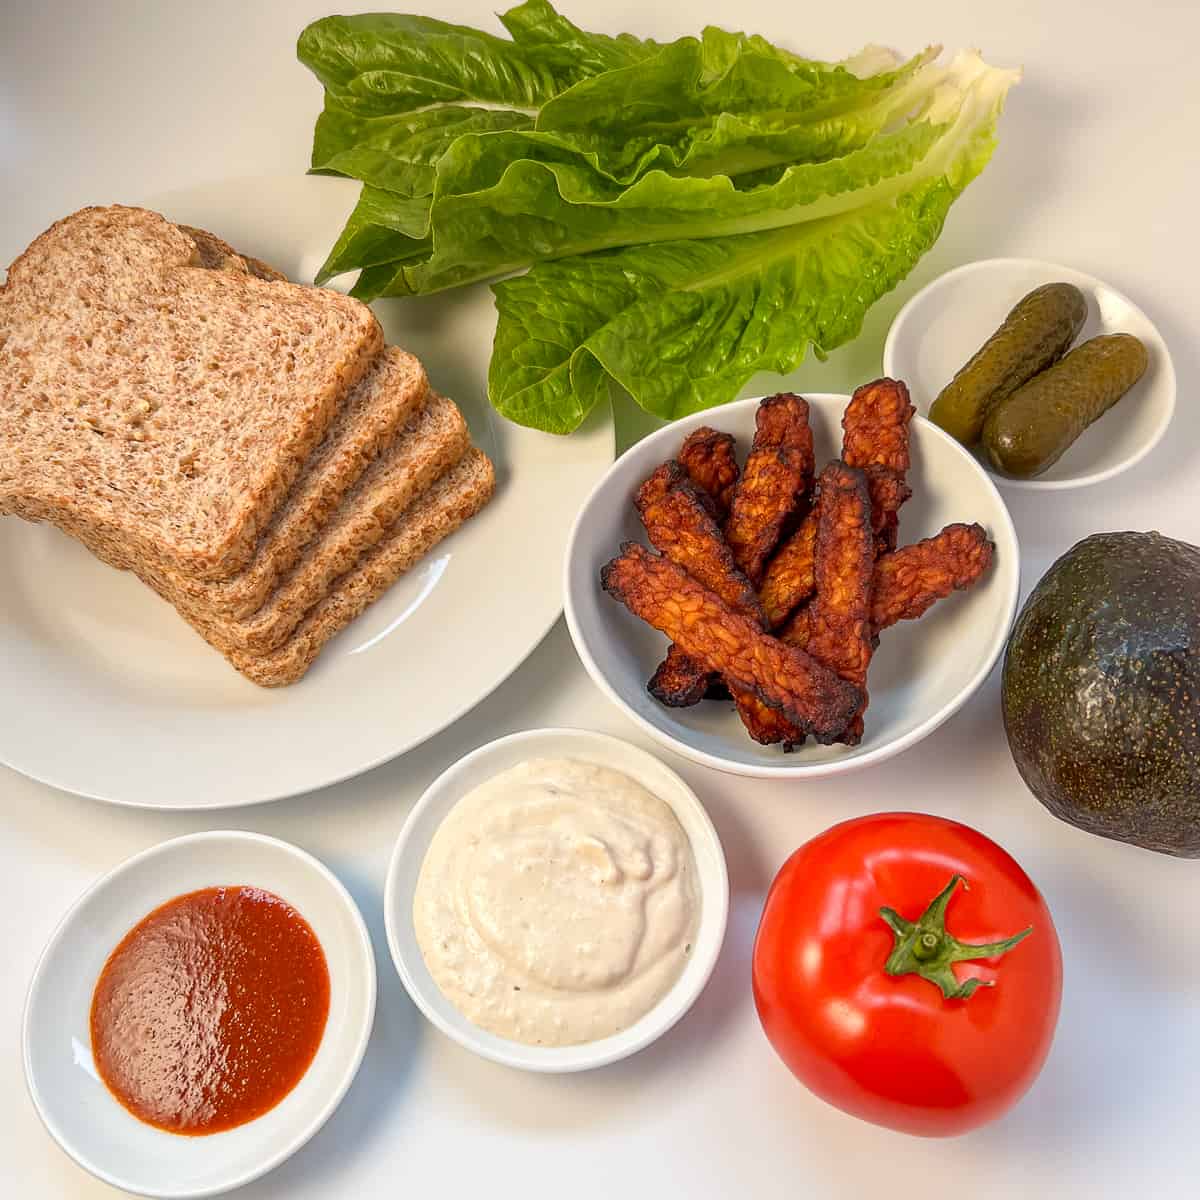 Ingredients for tempeh blt: sprouted grain bread, romaine lettuce, tempeh bacon, vegan mayo, tomato, avocado, dill pickle and sriracha hot sauce.